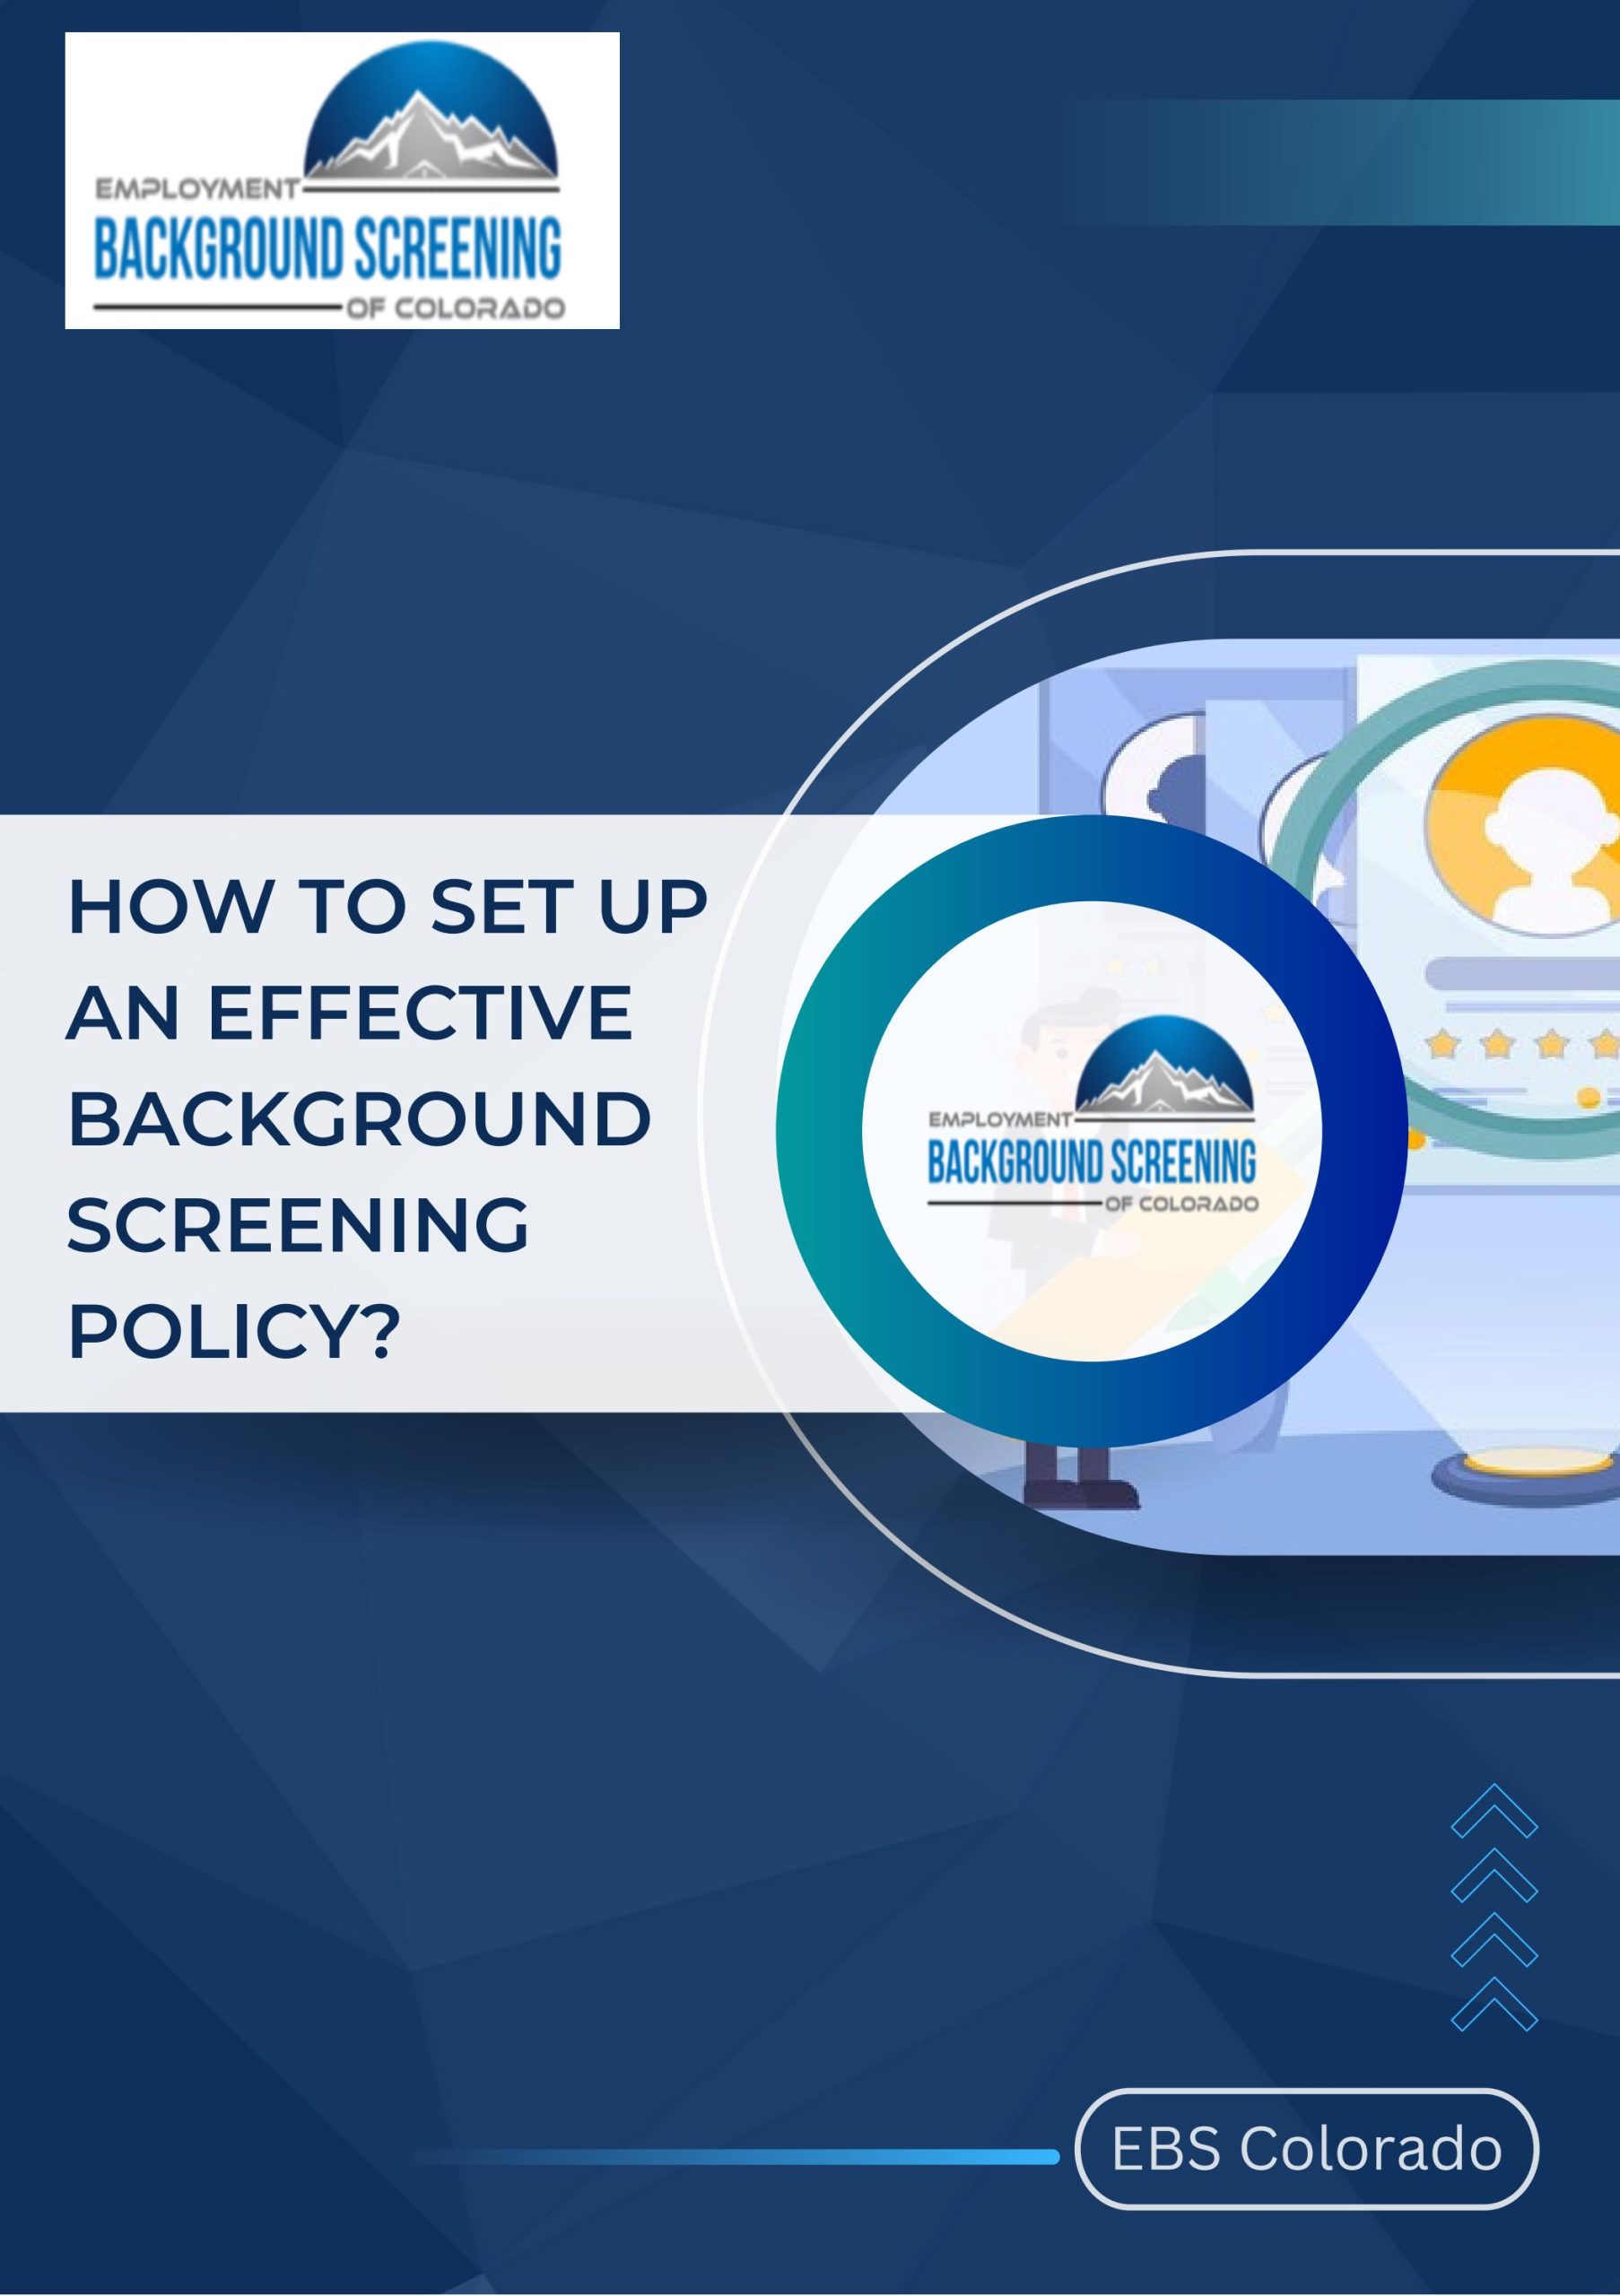 EBS Colorado Blog – HOW TO SET UP AN EFFECTIVE BACKGROUND SCREENING POLICY? – ISSUU